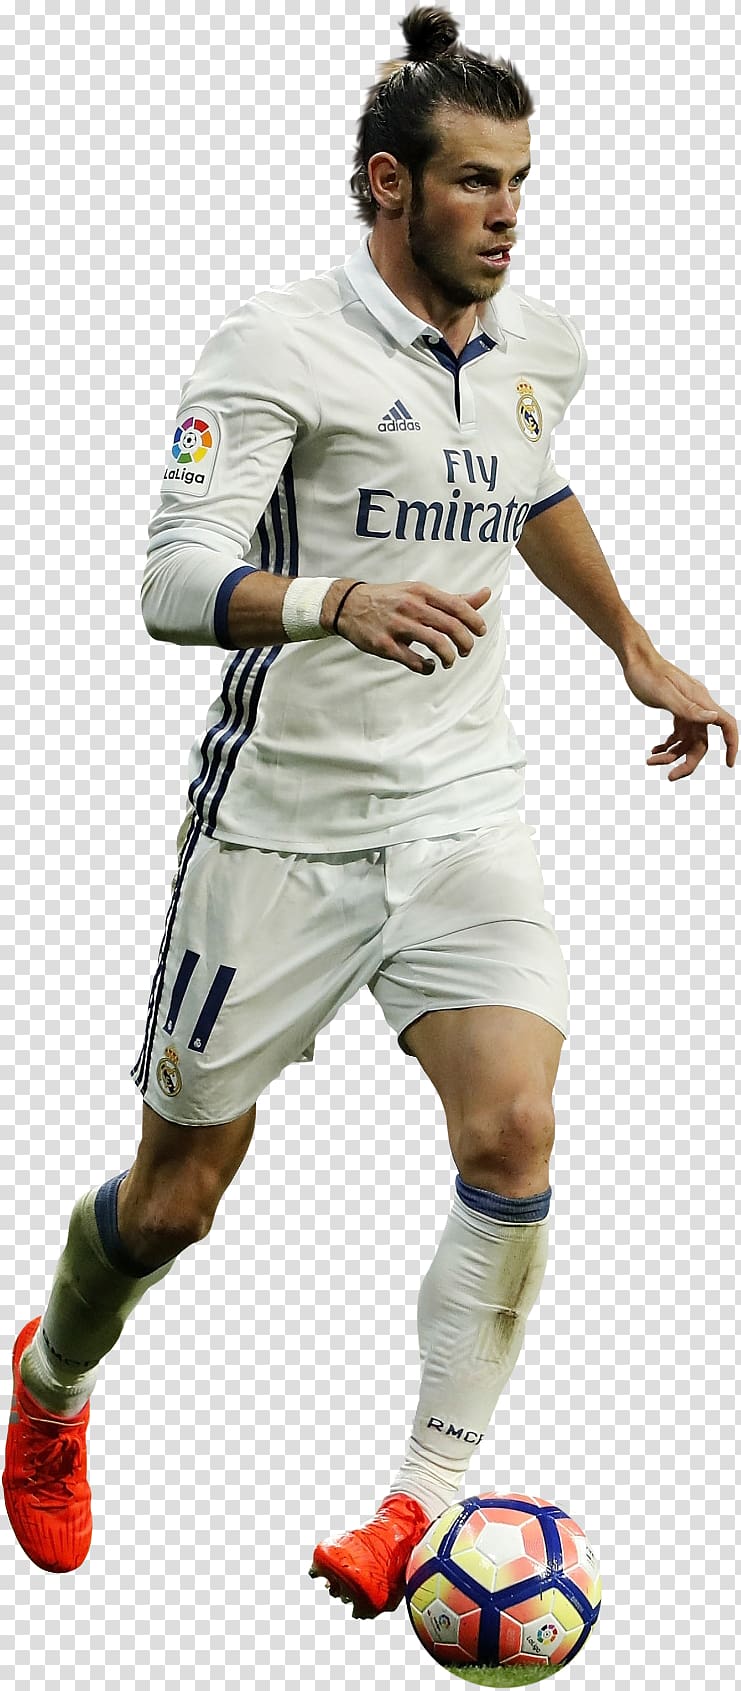 Gareth Bale Real Madrid C.F. Football player Sports, football transparent background PNG clipart